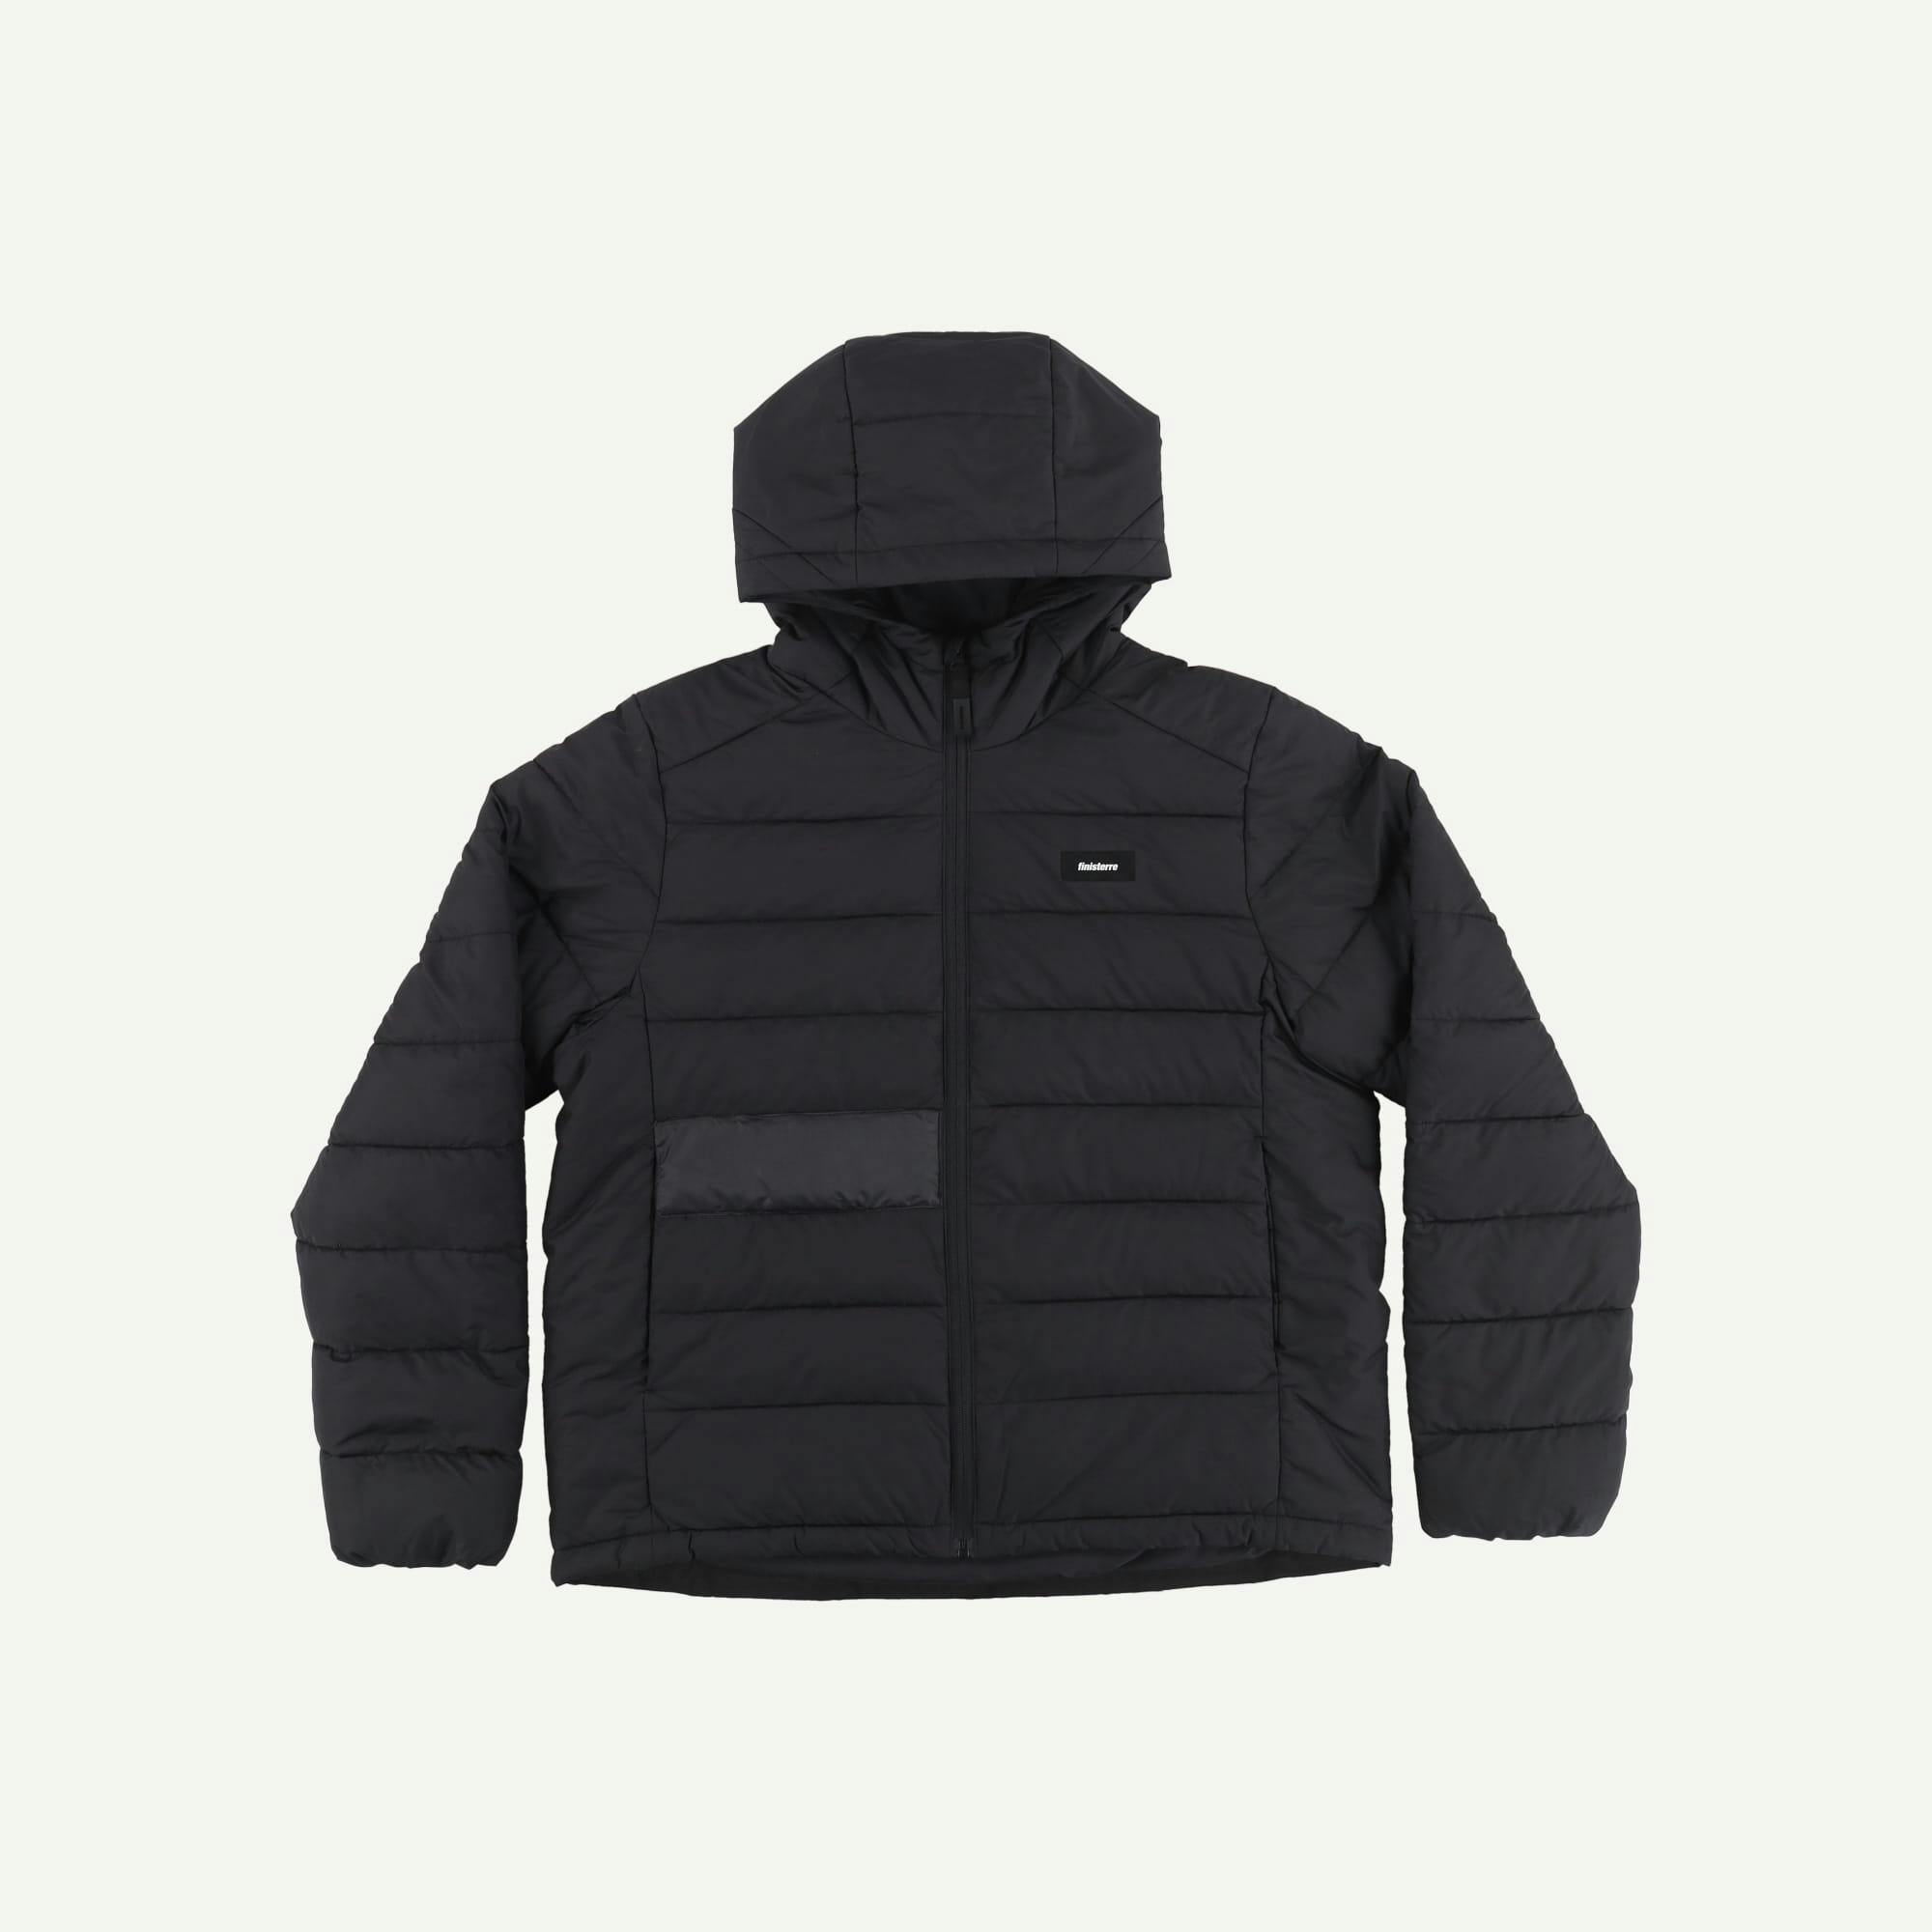 Finisterre Repaired Black Jacket